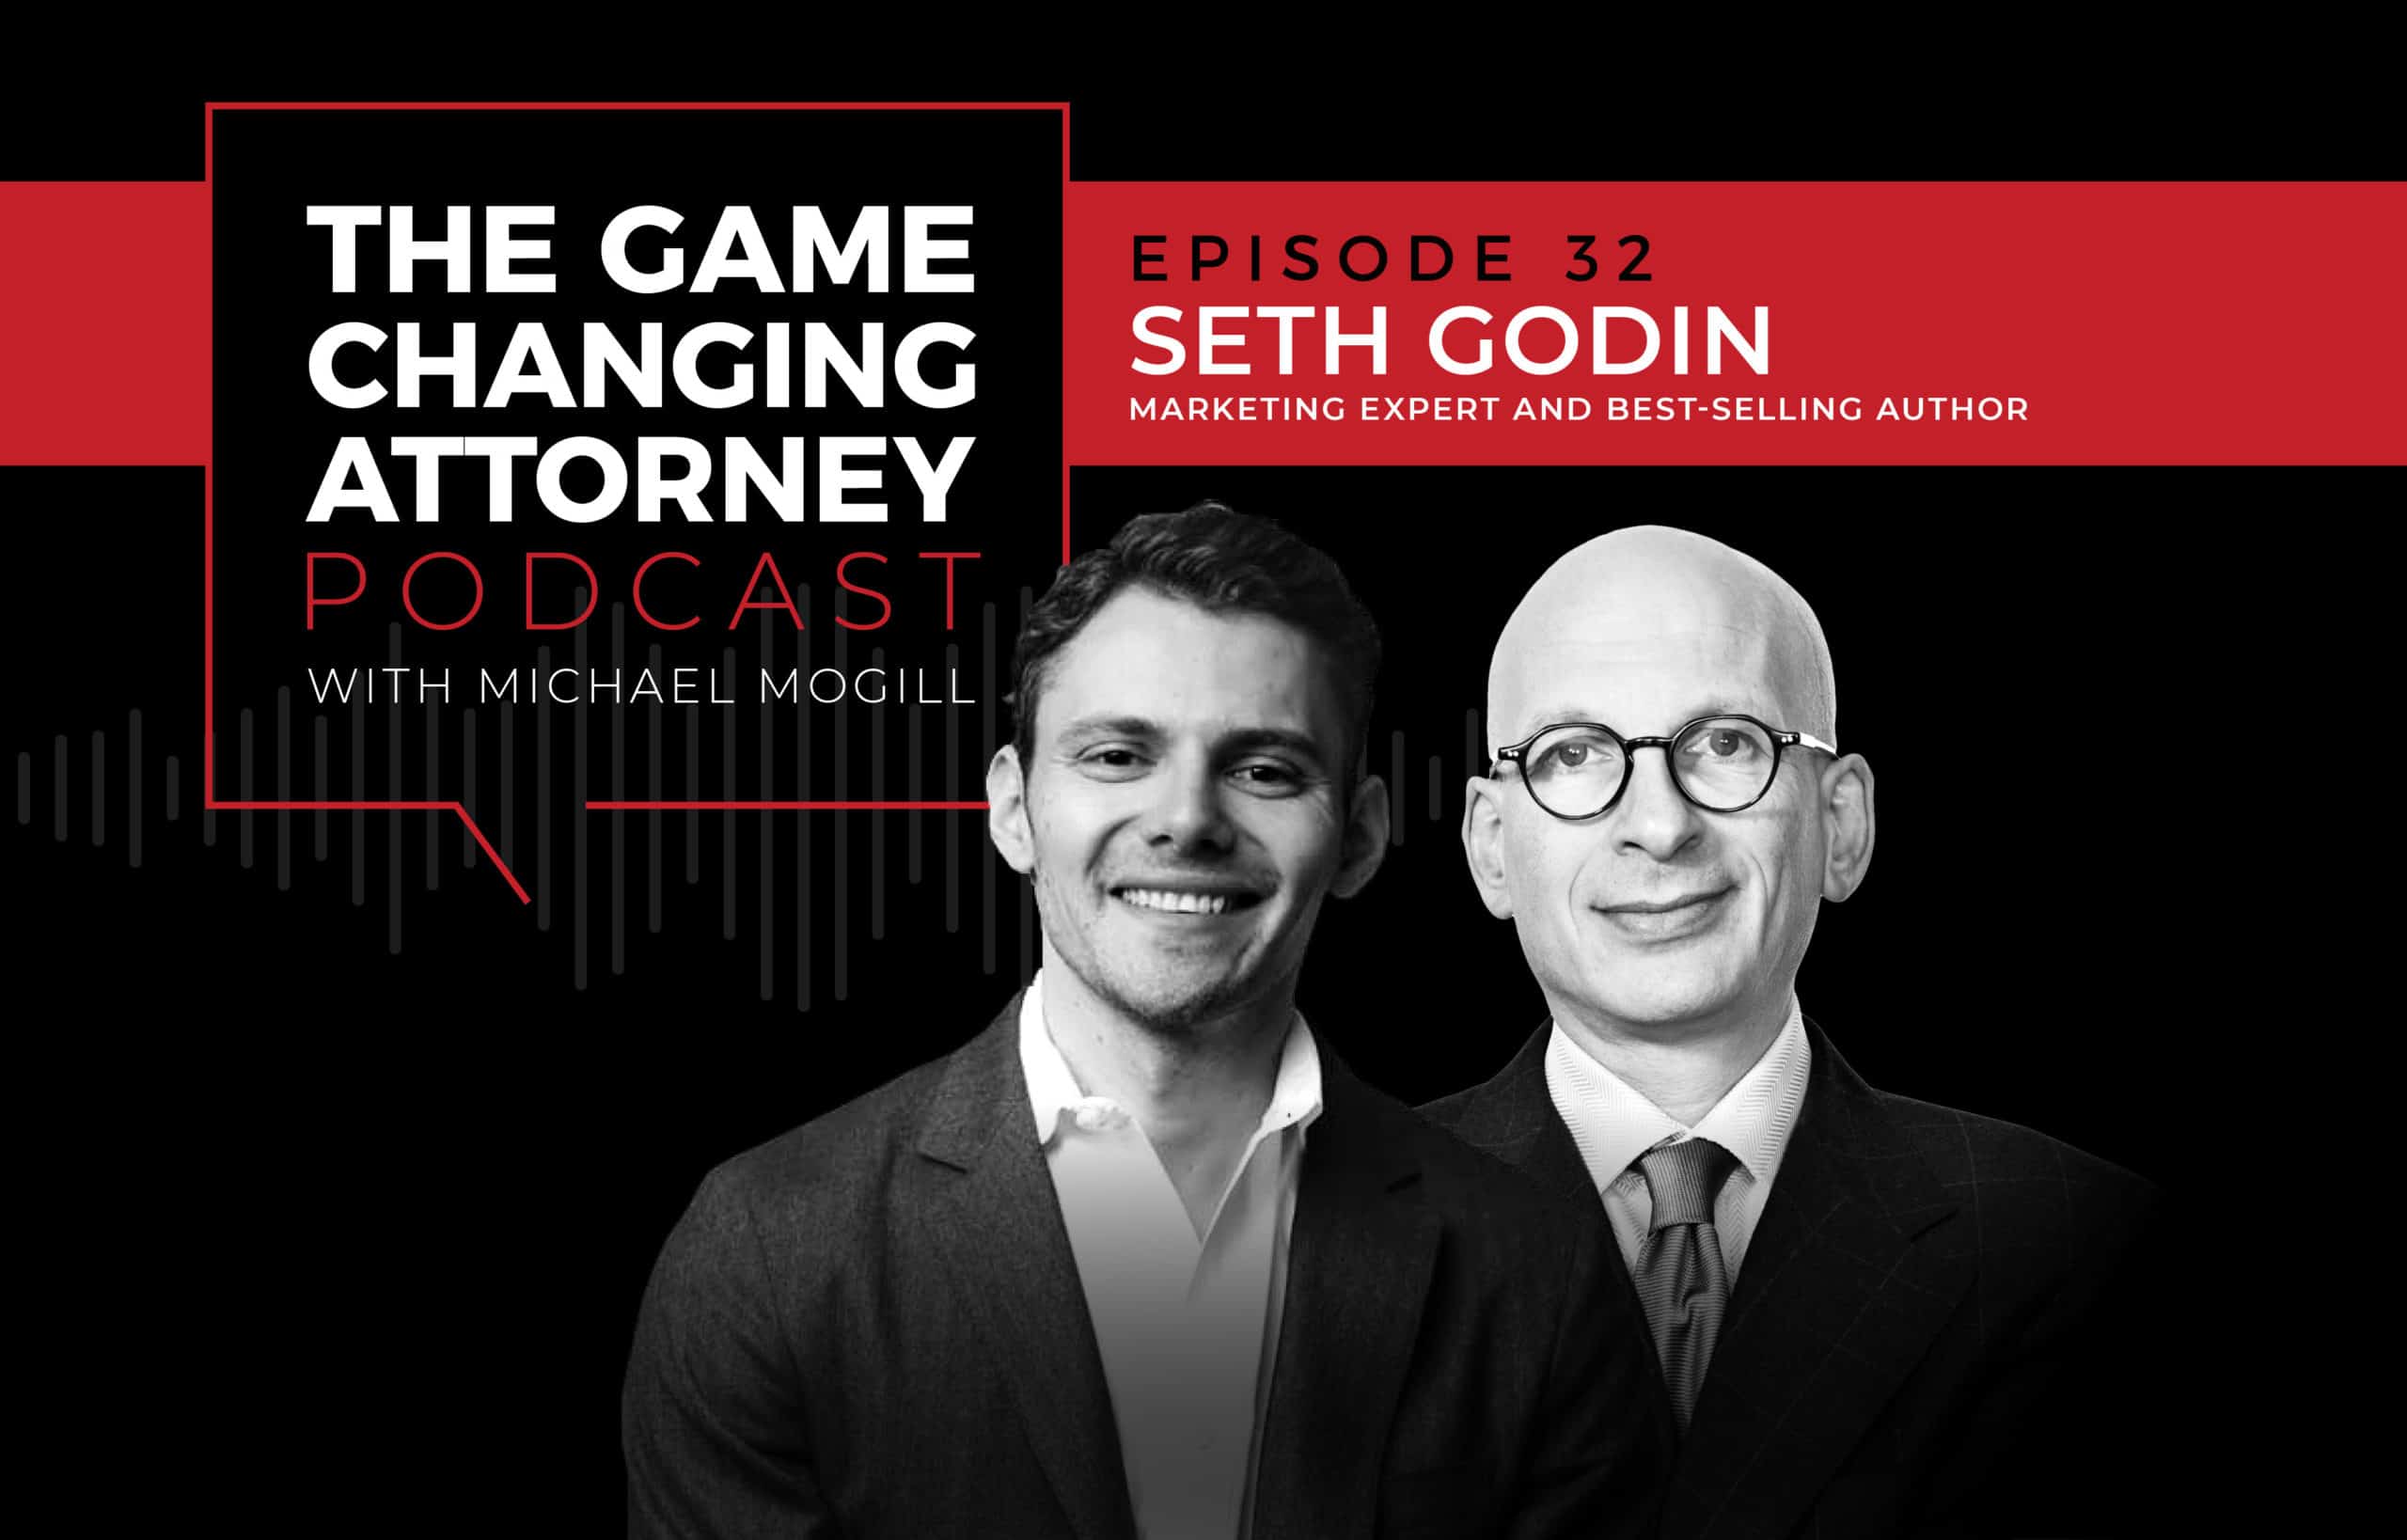 Seth Godin - The Game Changing Attorney Podcast - Mobile